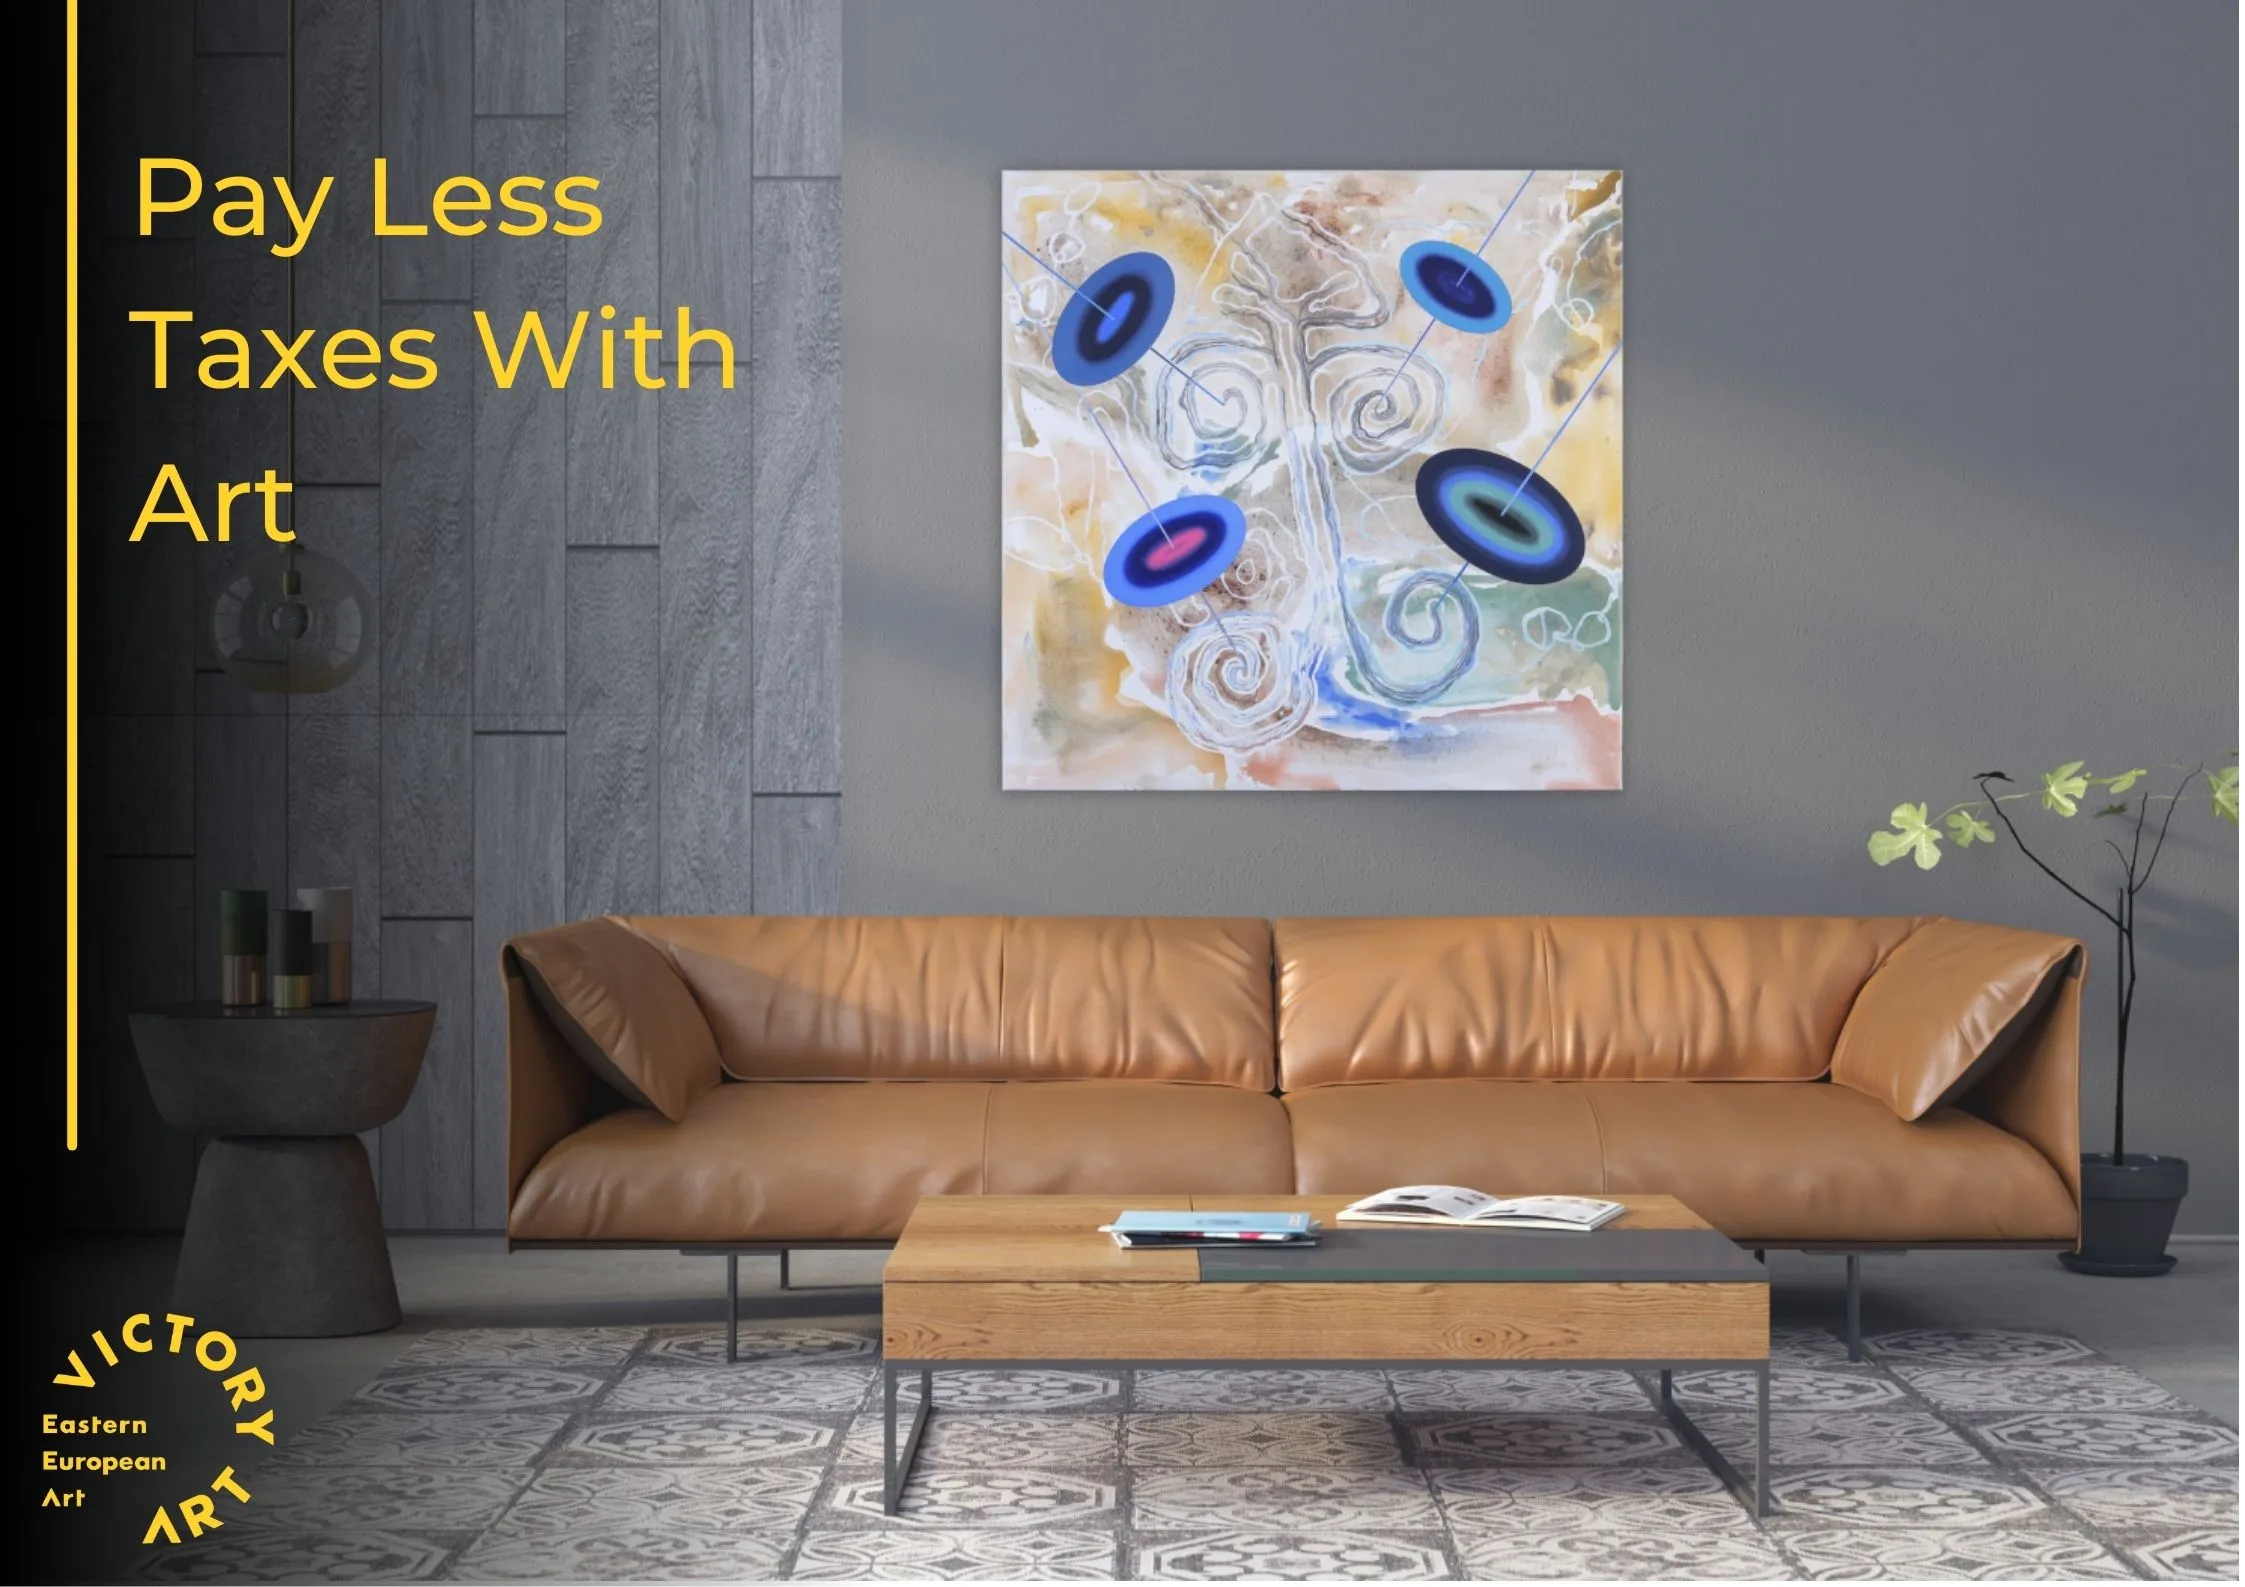 Pay Less Taxes with Art